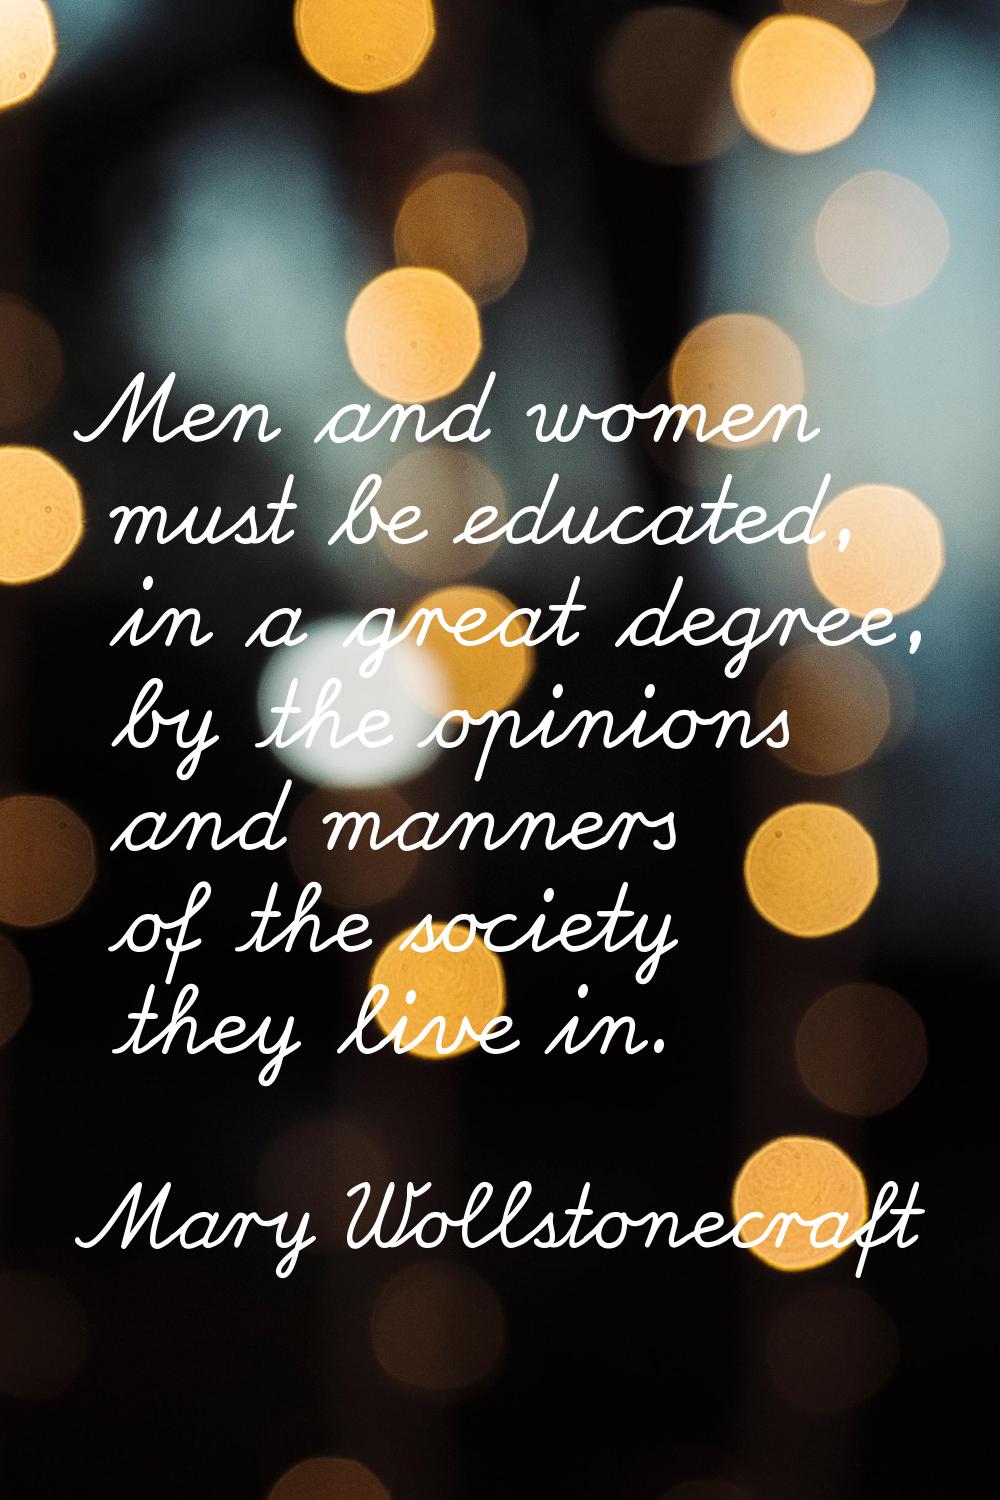 Men and women must be educated, in a great degree, by the opinions and manners of the society they 